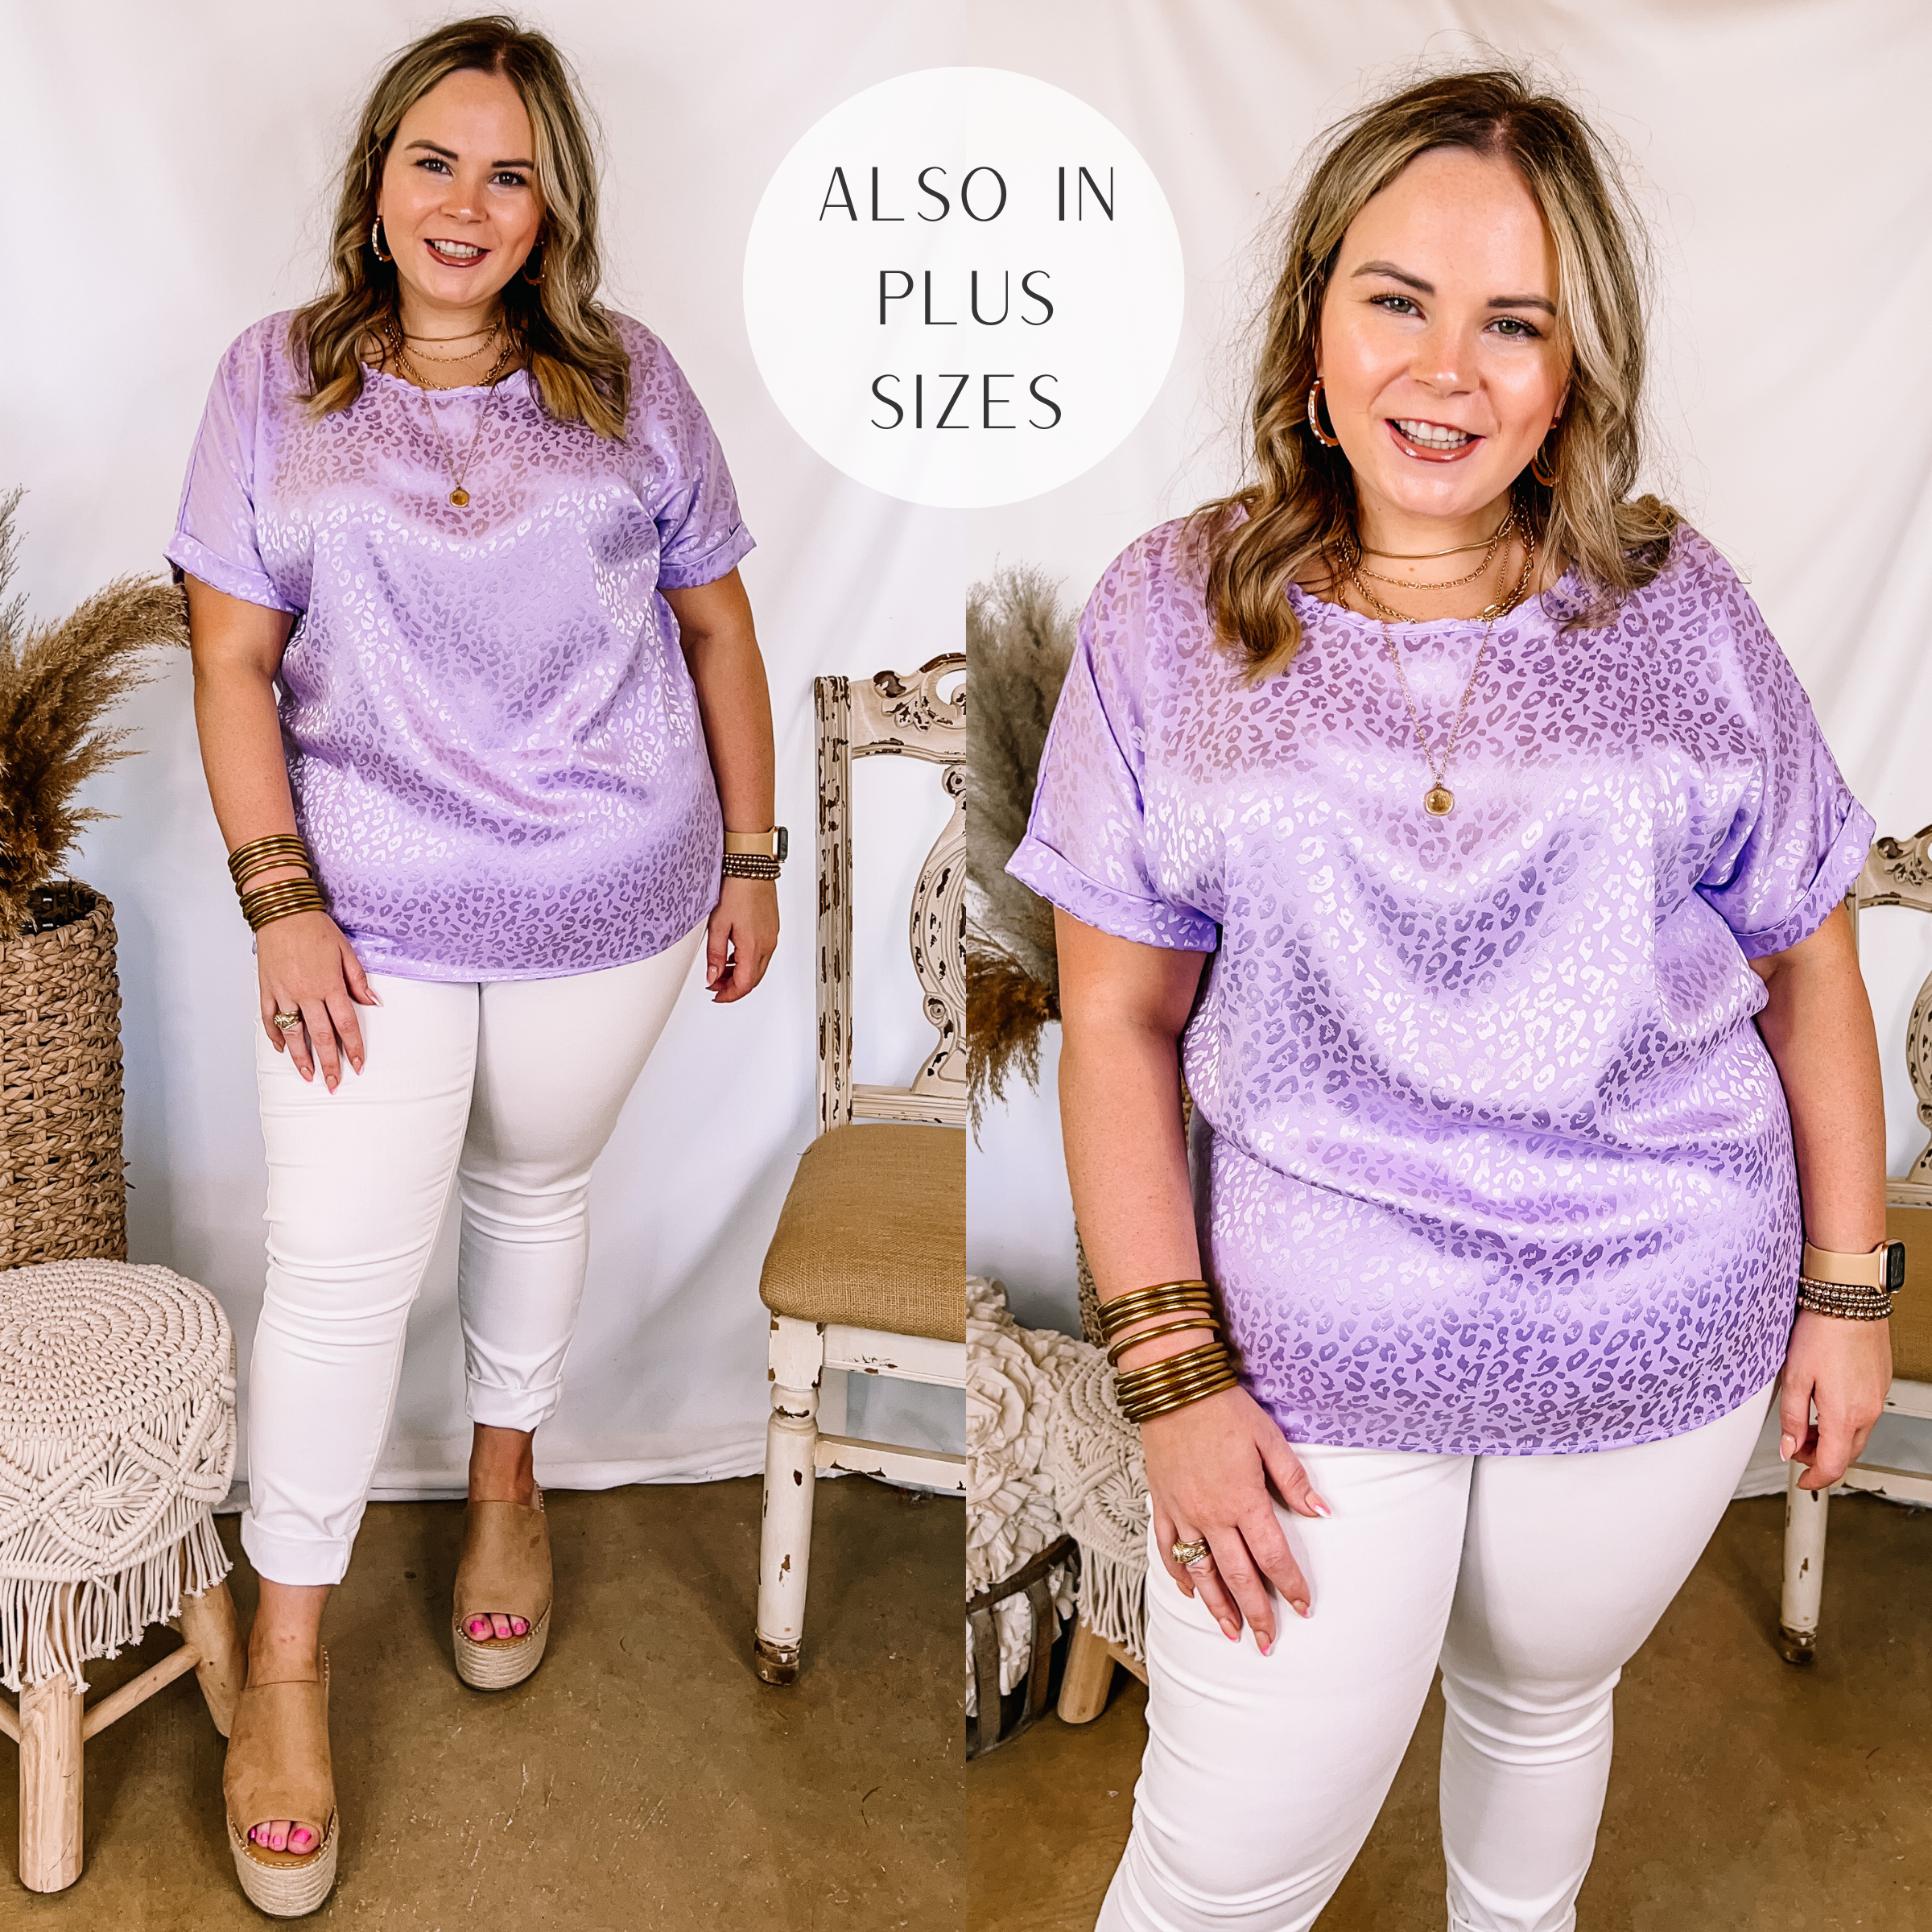 Model is wearing a purple satin top with a shiny leopard print. Model has this short sleeve top paired with white skinny jeans, tan wedges, and gold jewelry.